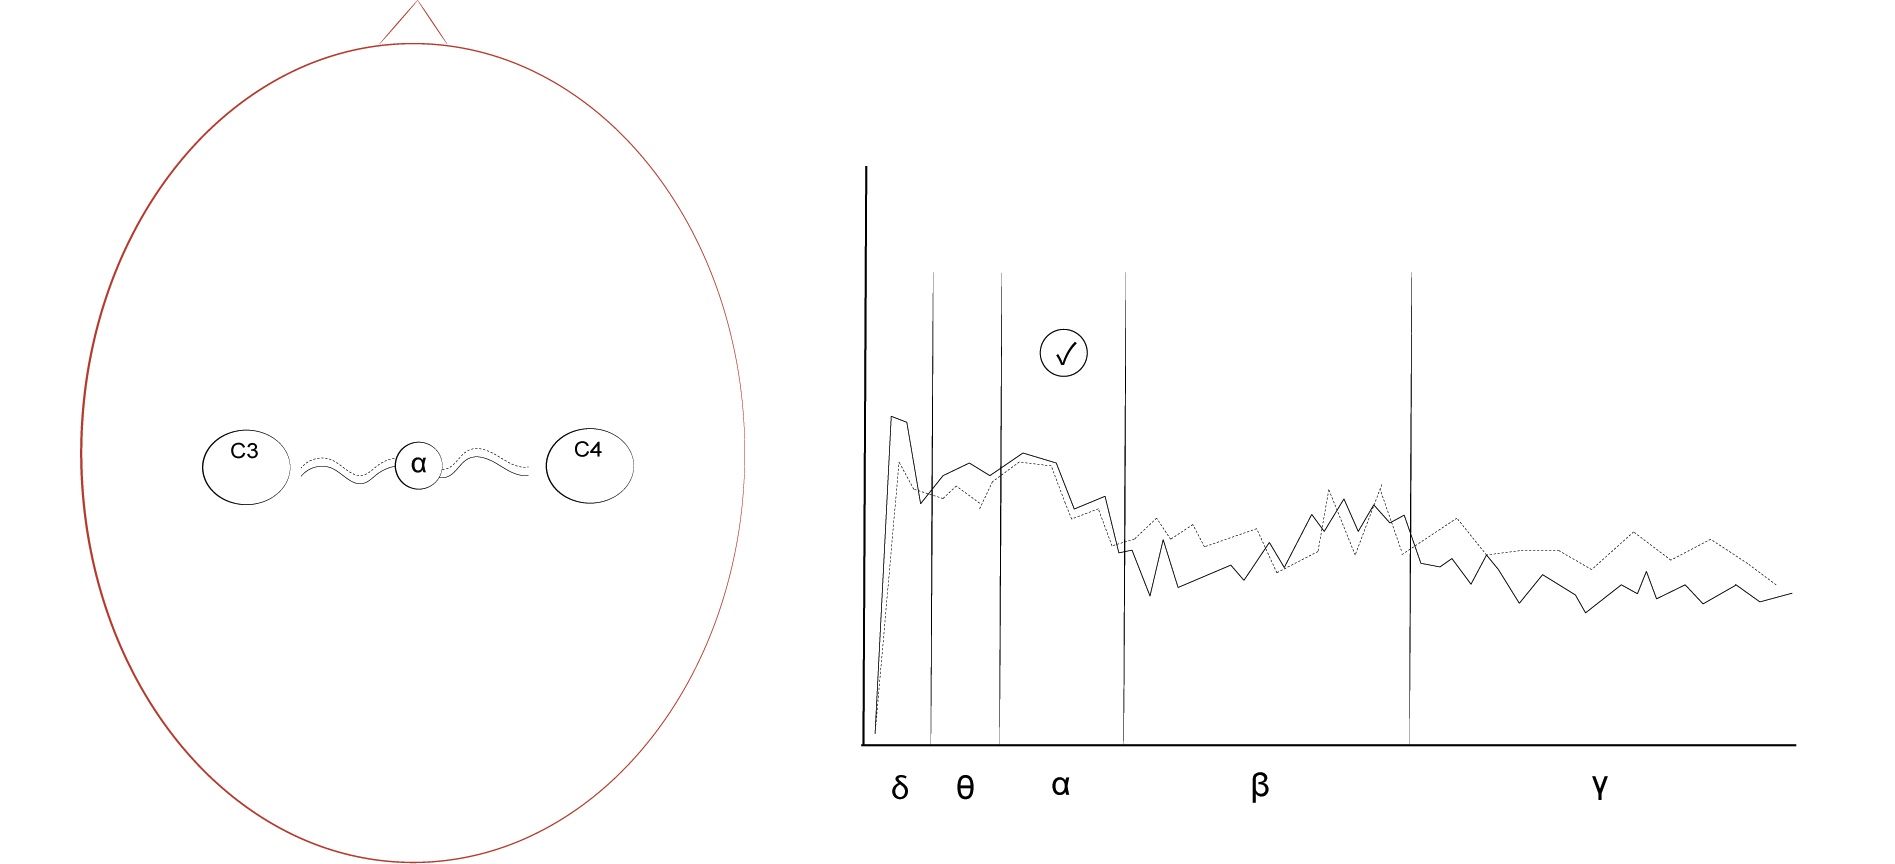 An alpha-phase synchrony protocol's electrode location (left) and spectral plot (right) show reward given when alpha between C3 and C4 are in phase.